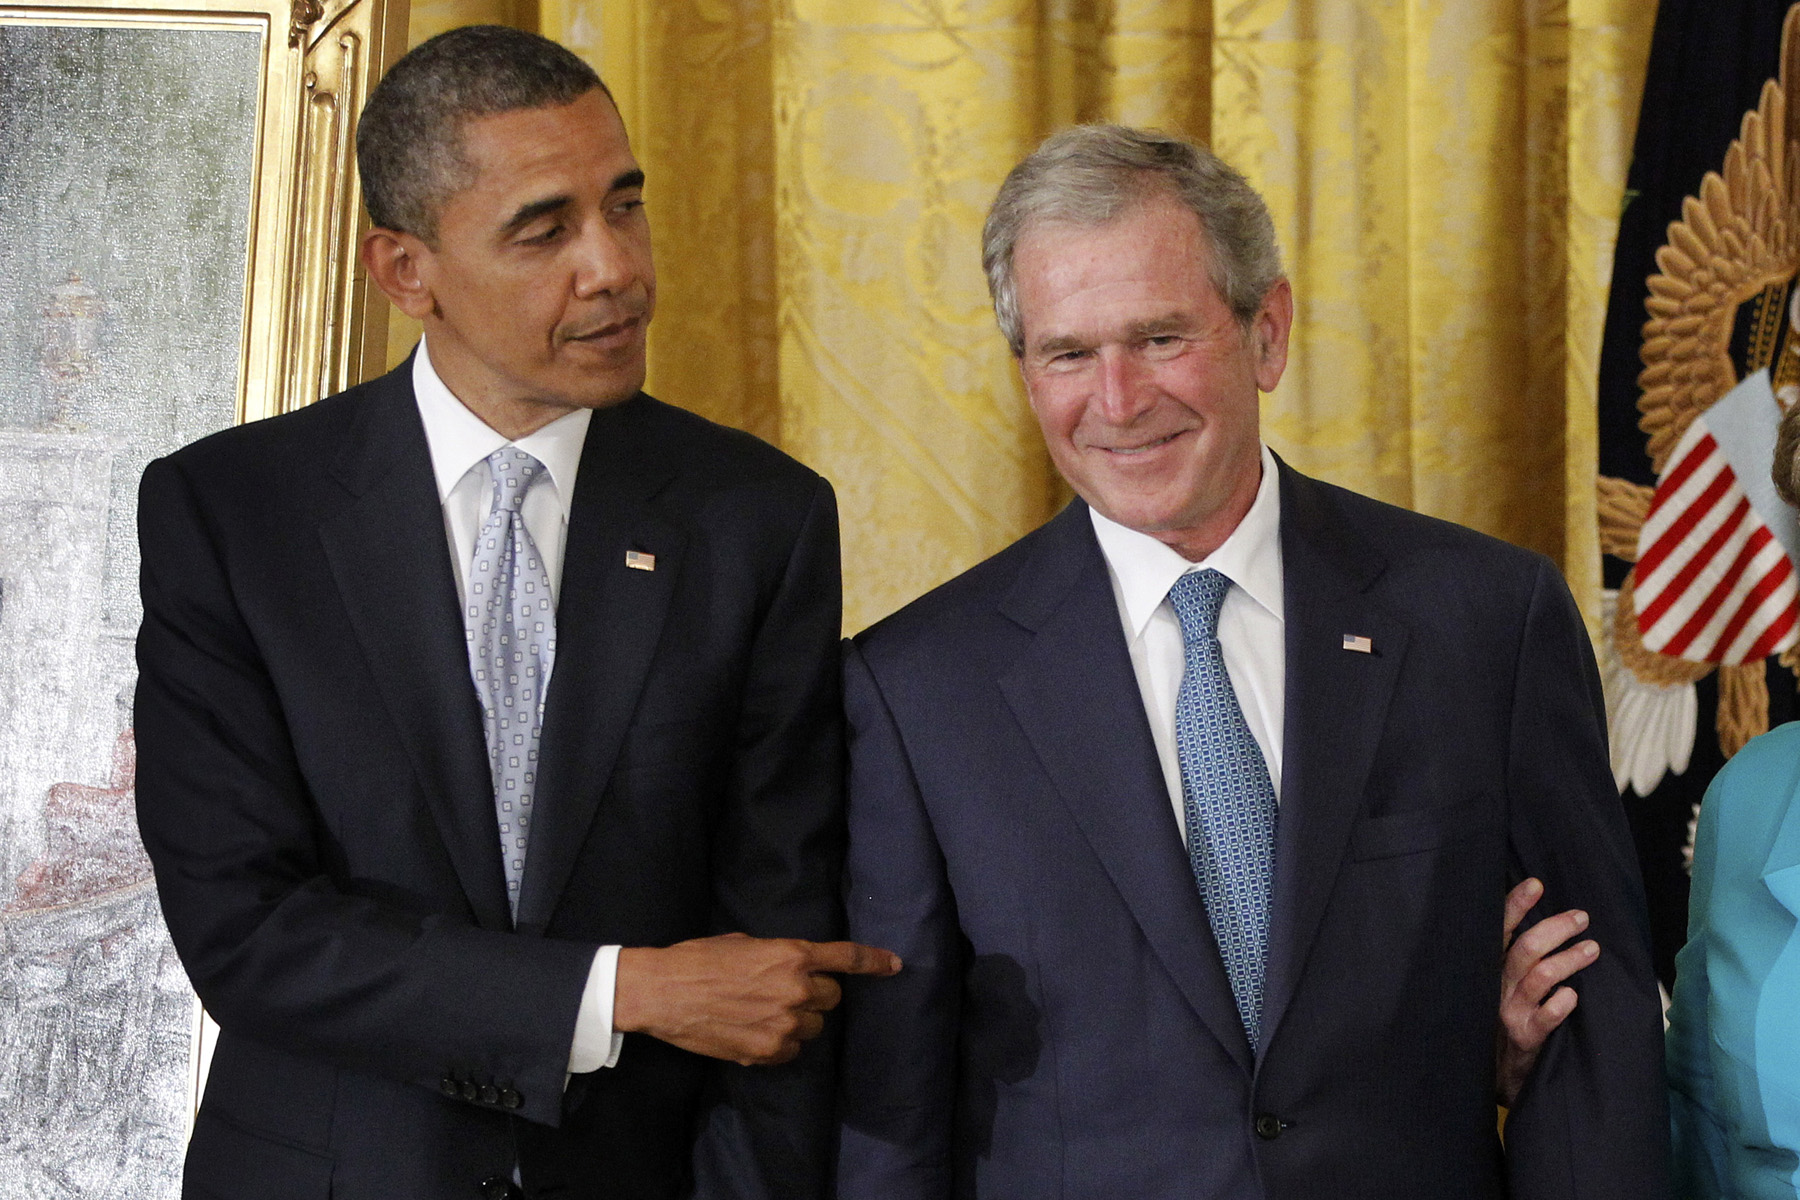 President Barack Obama points to former President George W. Bush during a ceremony to unveil his official portrait, Thursday, May 31, 2012, in the East Room at the White House in Washington. (Charles Dharapa—AP)